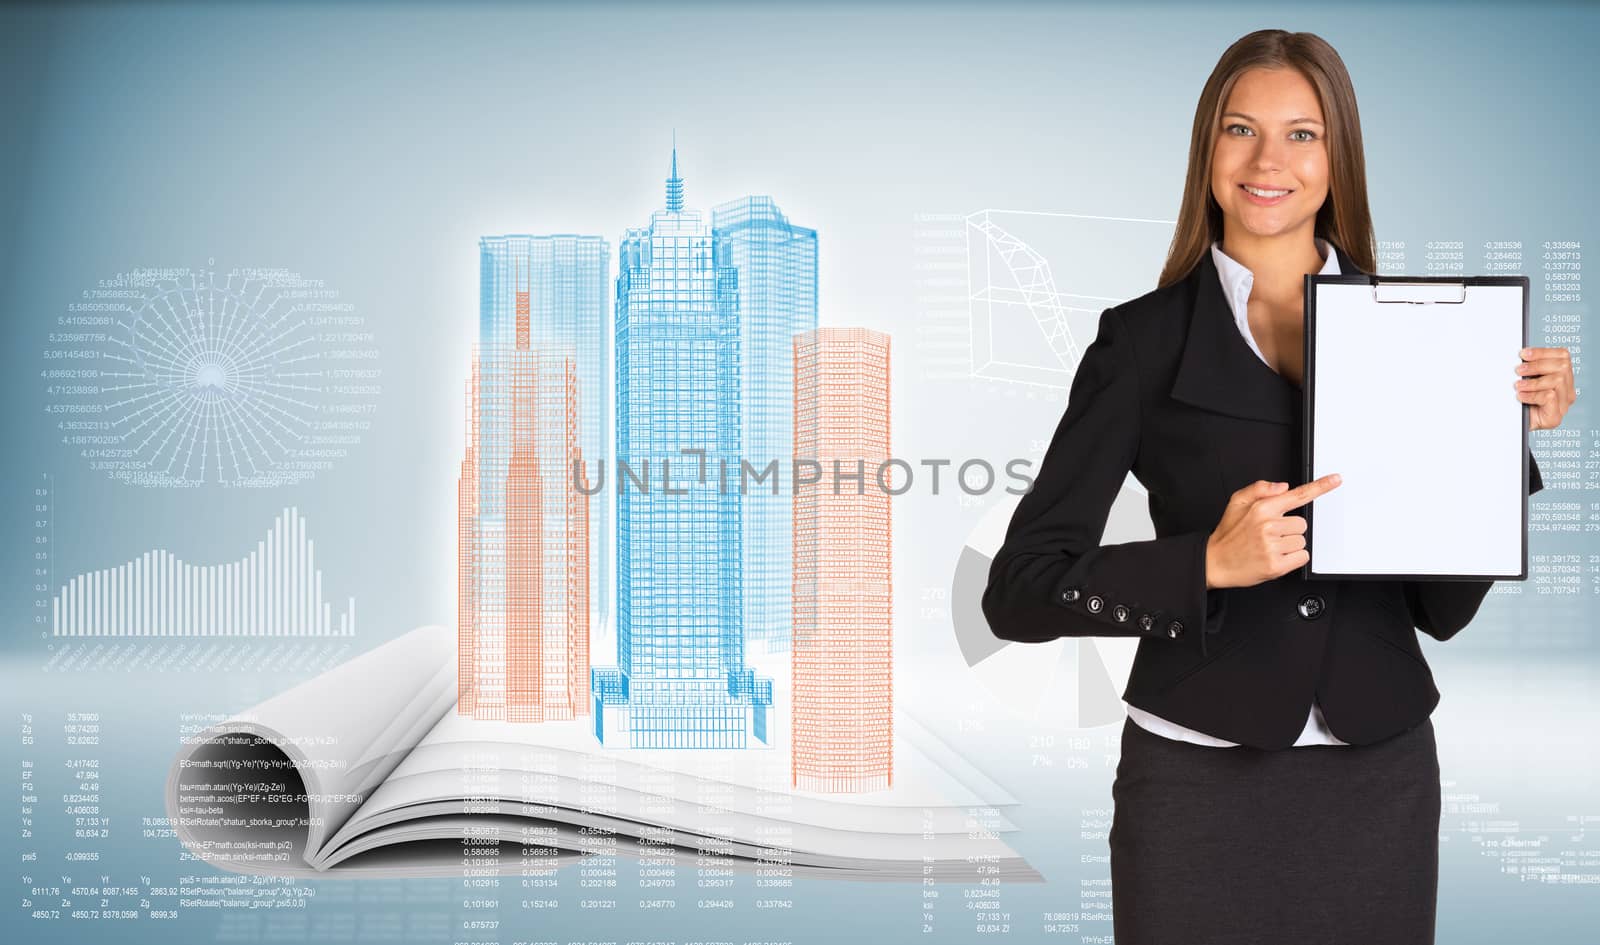 Businesswoman holding paper holder. High-tech wire-frame skyscrapers on open book  as backdrop